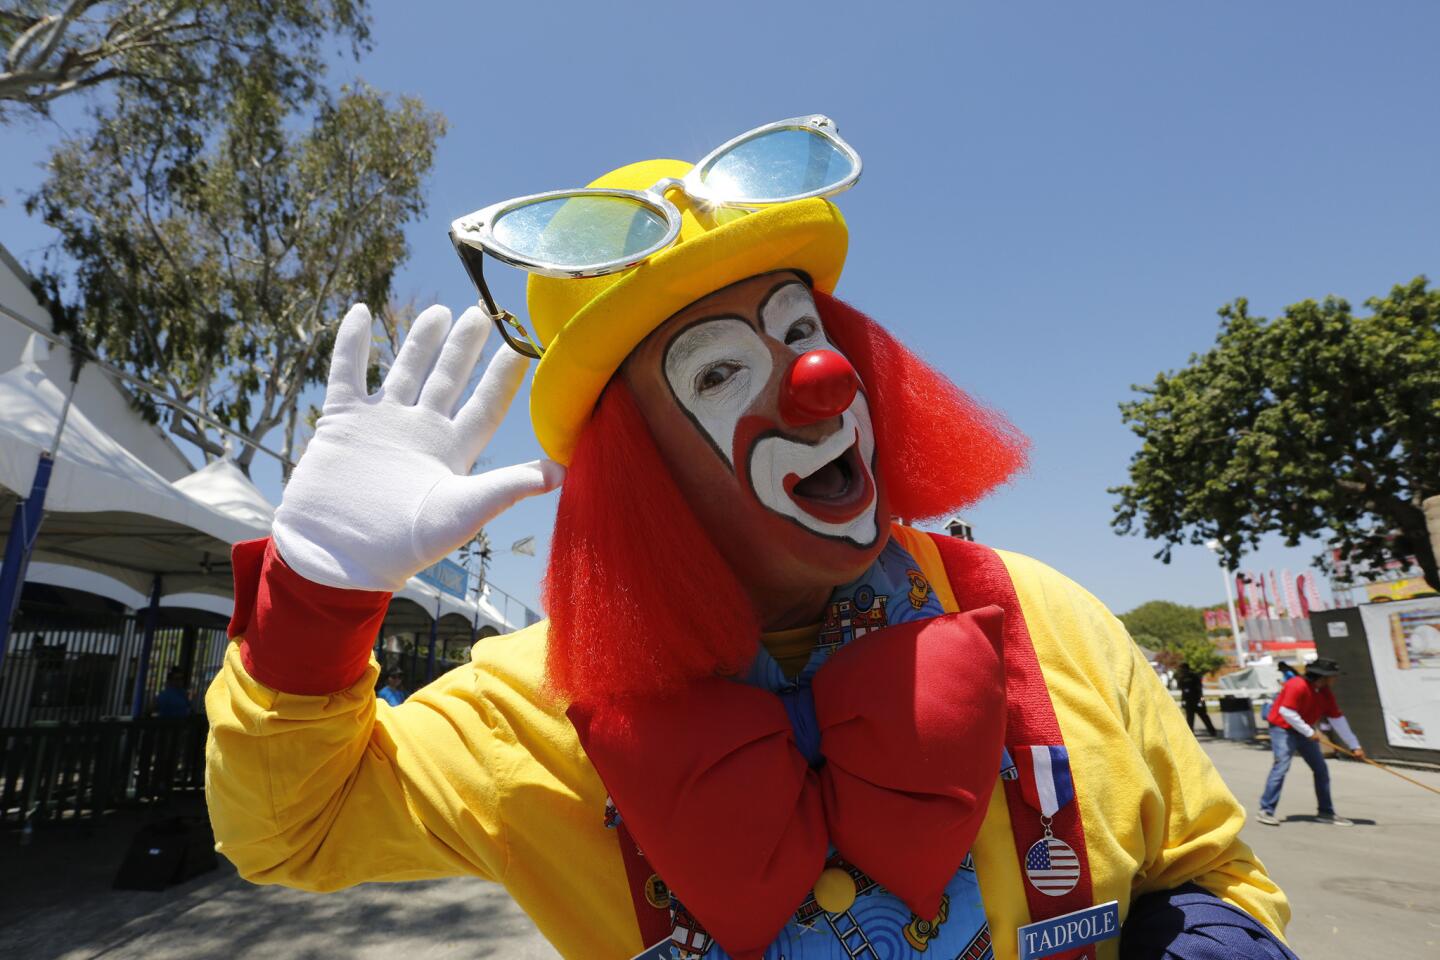 Tadpole the clown is part of the greeting committee on opening day of the O.C. Fair in Costa Mesa.